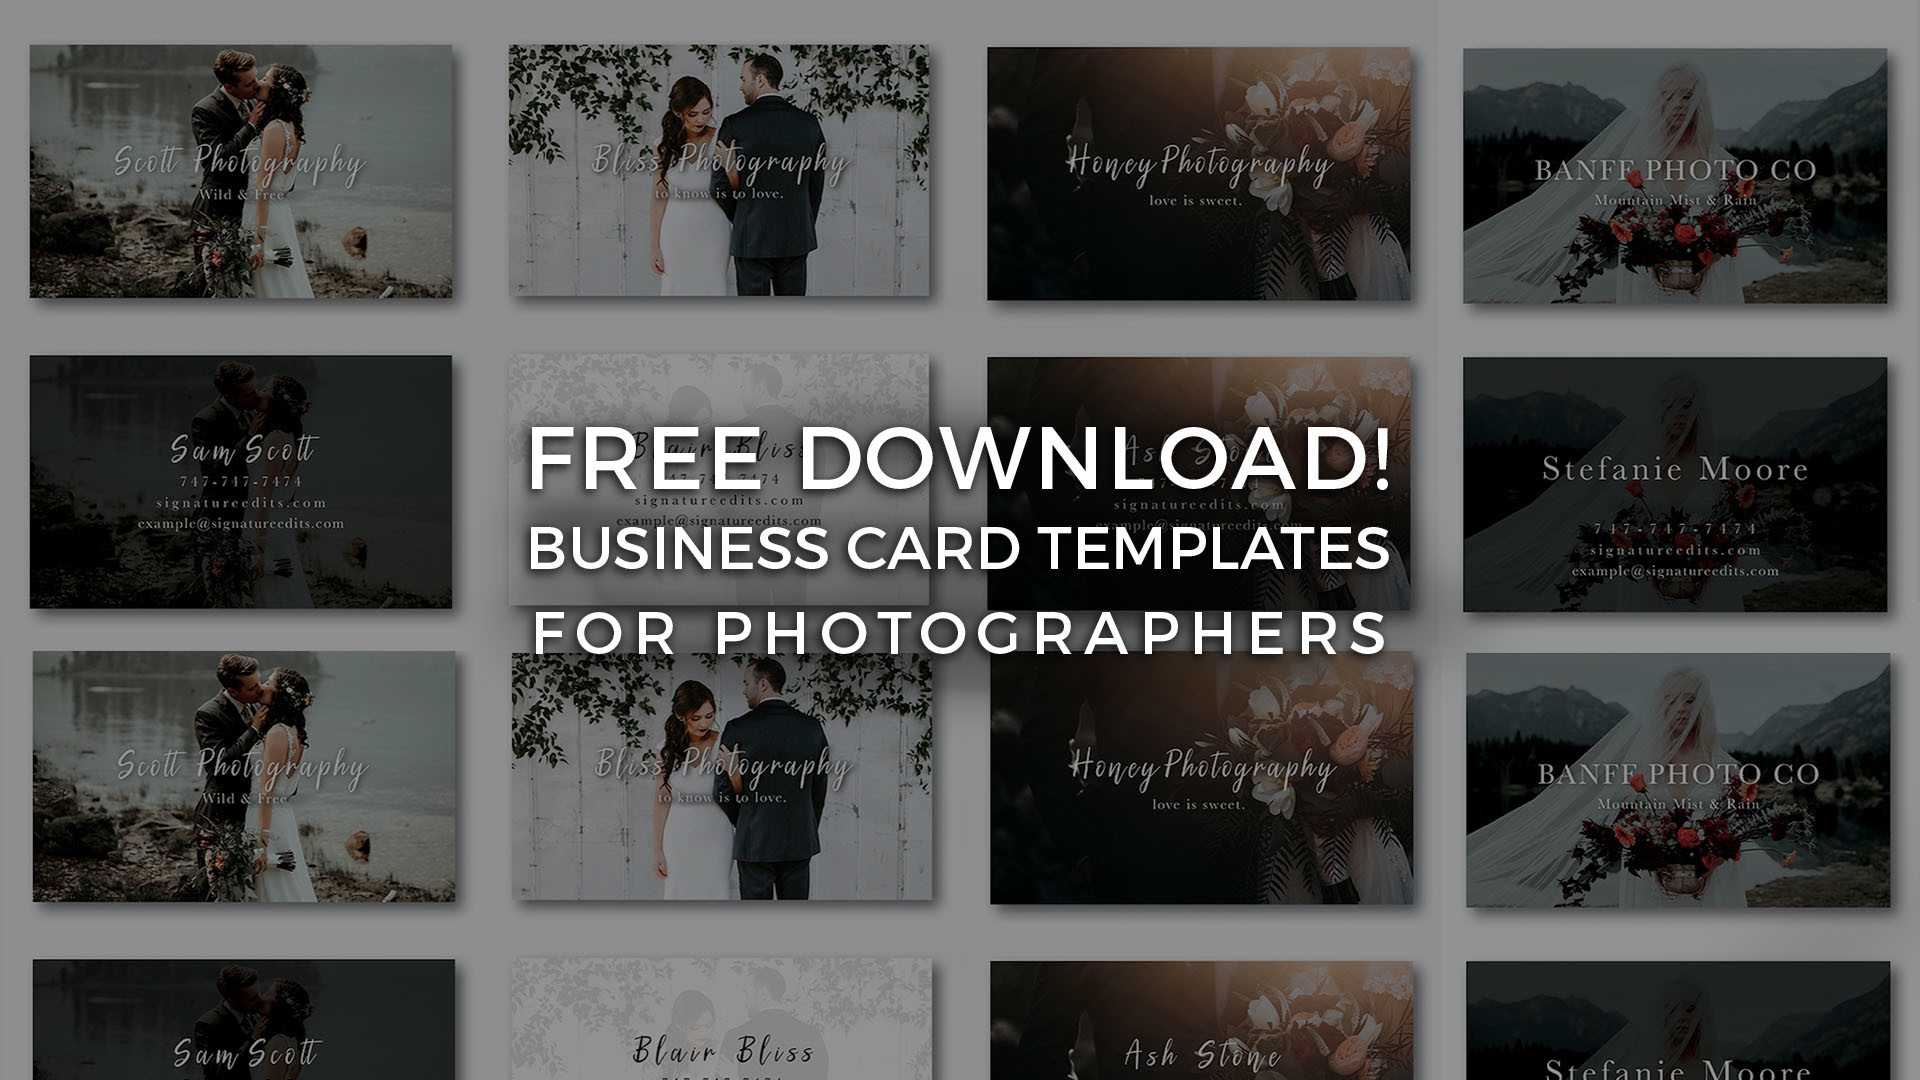 Free Photographer Business Card Templates! – Signature Edits With Regard To Photography Business Card Templates Free Download